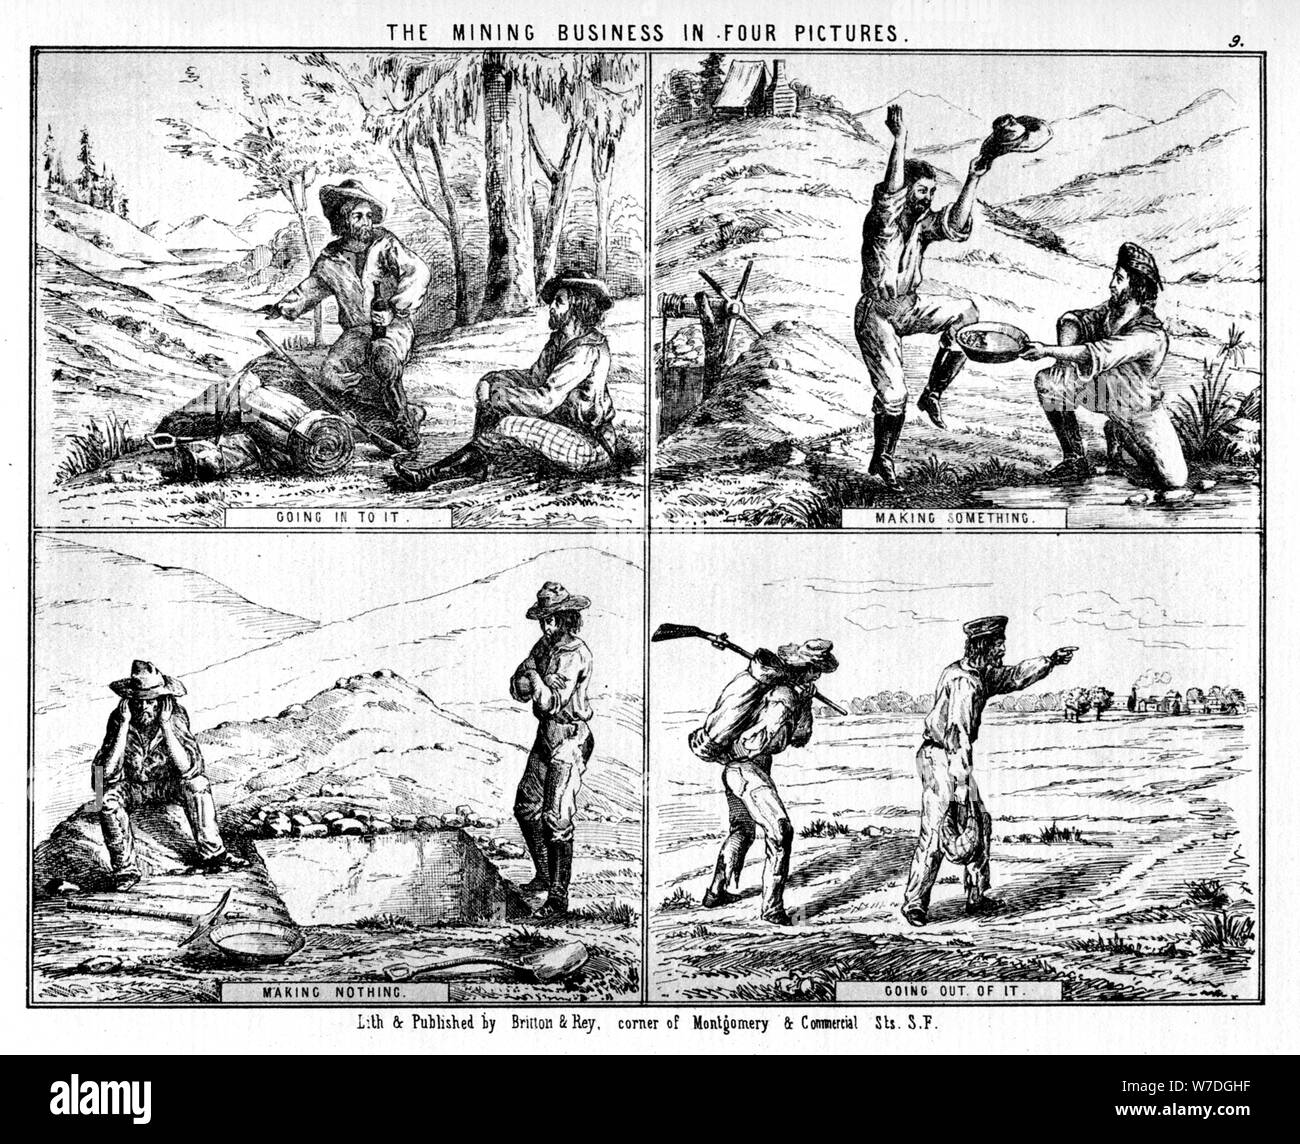 'The Mining Business in Four Pictures', 19th century (1937).Artist: Britton & Rey Stock Photo